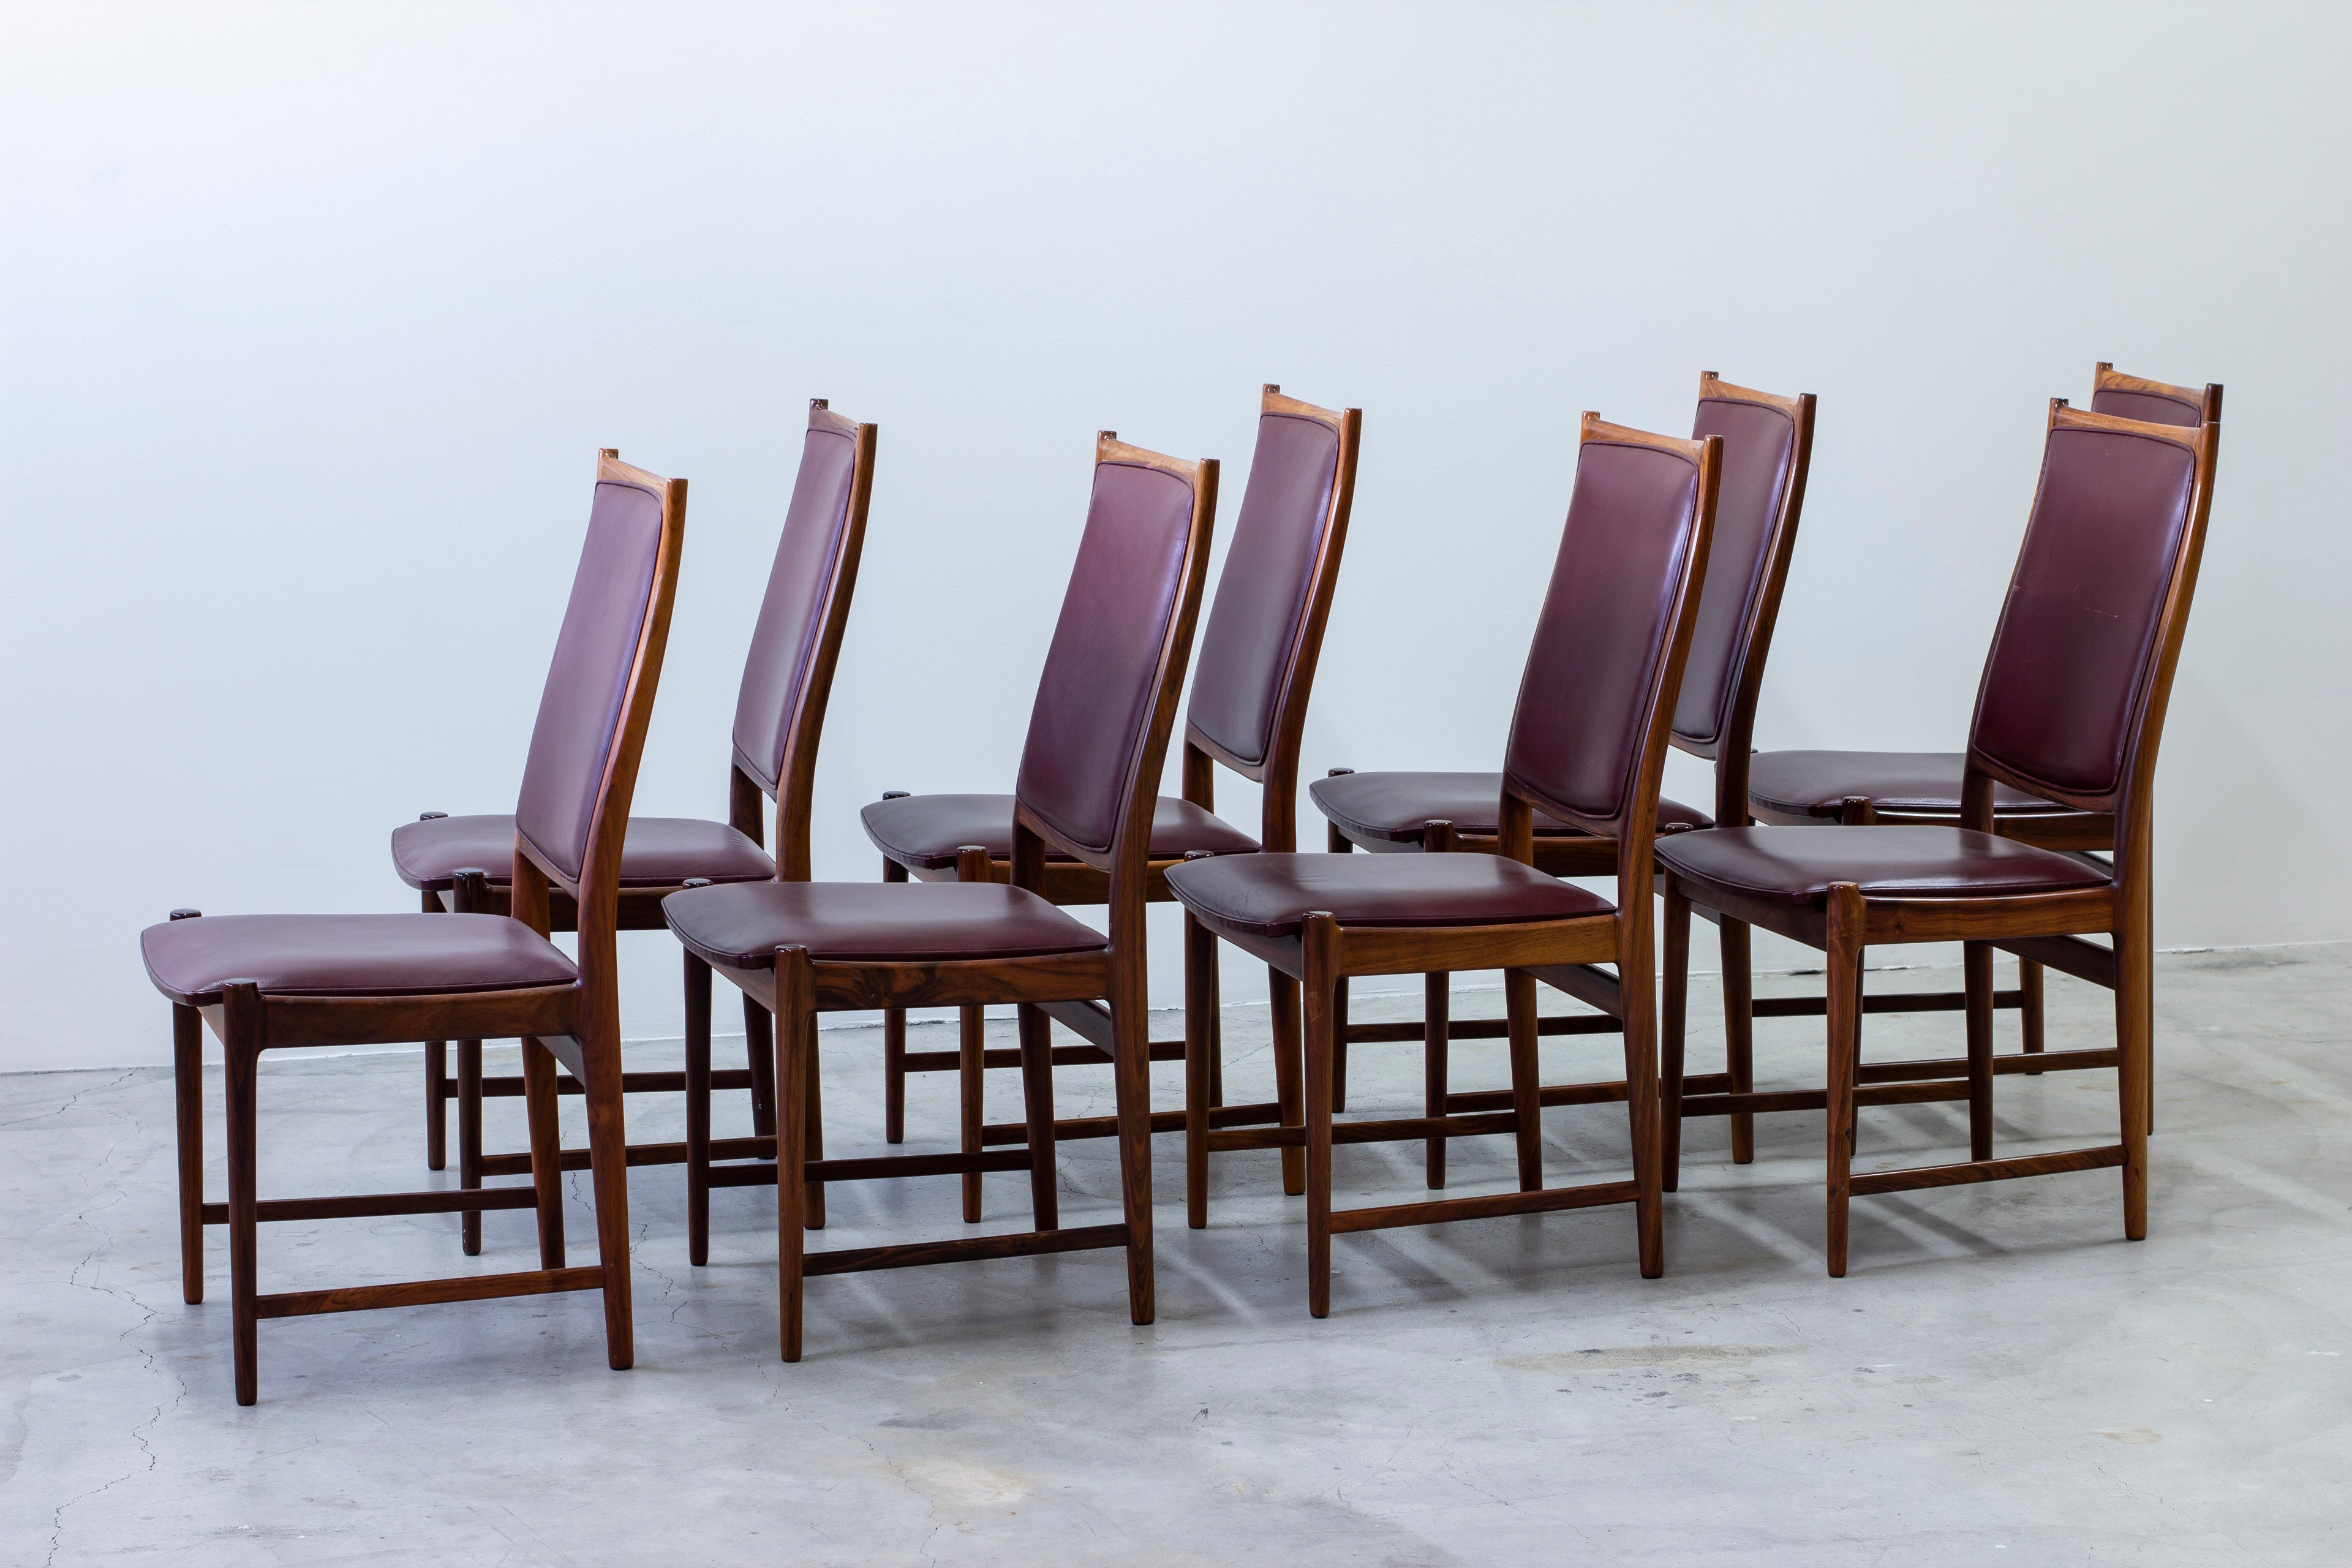 "Darby" palisander chairs by Afdal